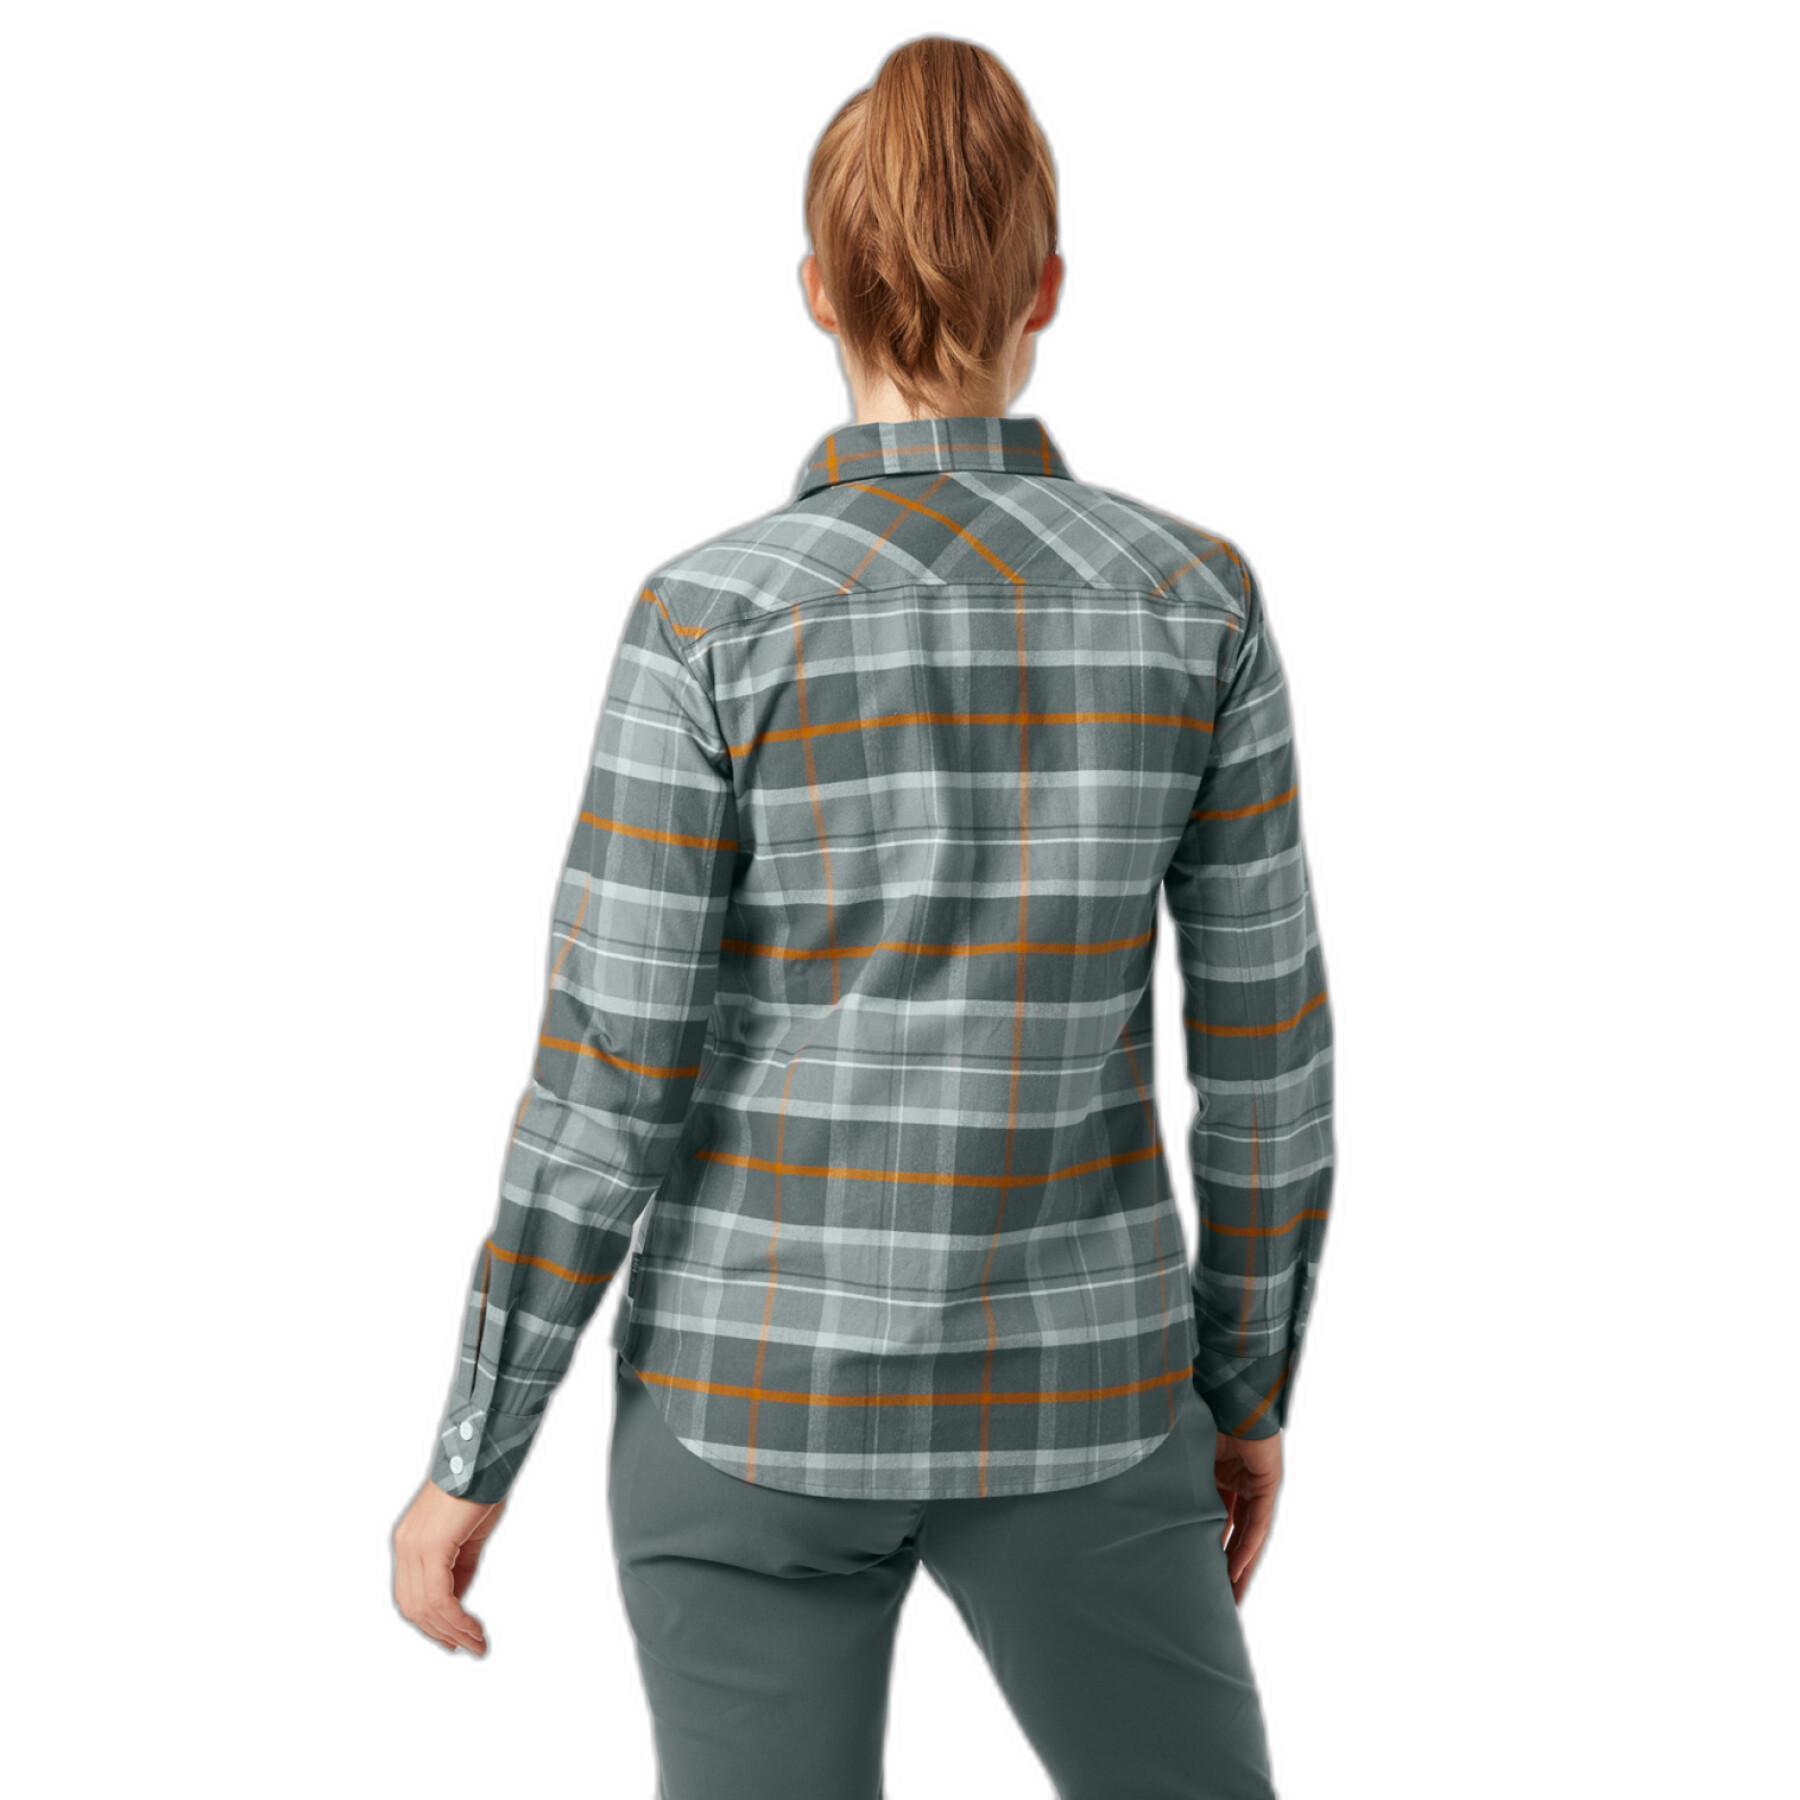 Long sleeve shirt with checkered pattern Helly Hansen classic checls